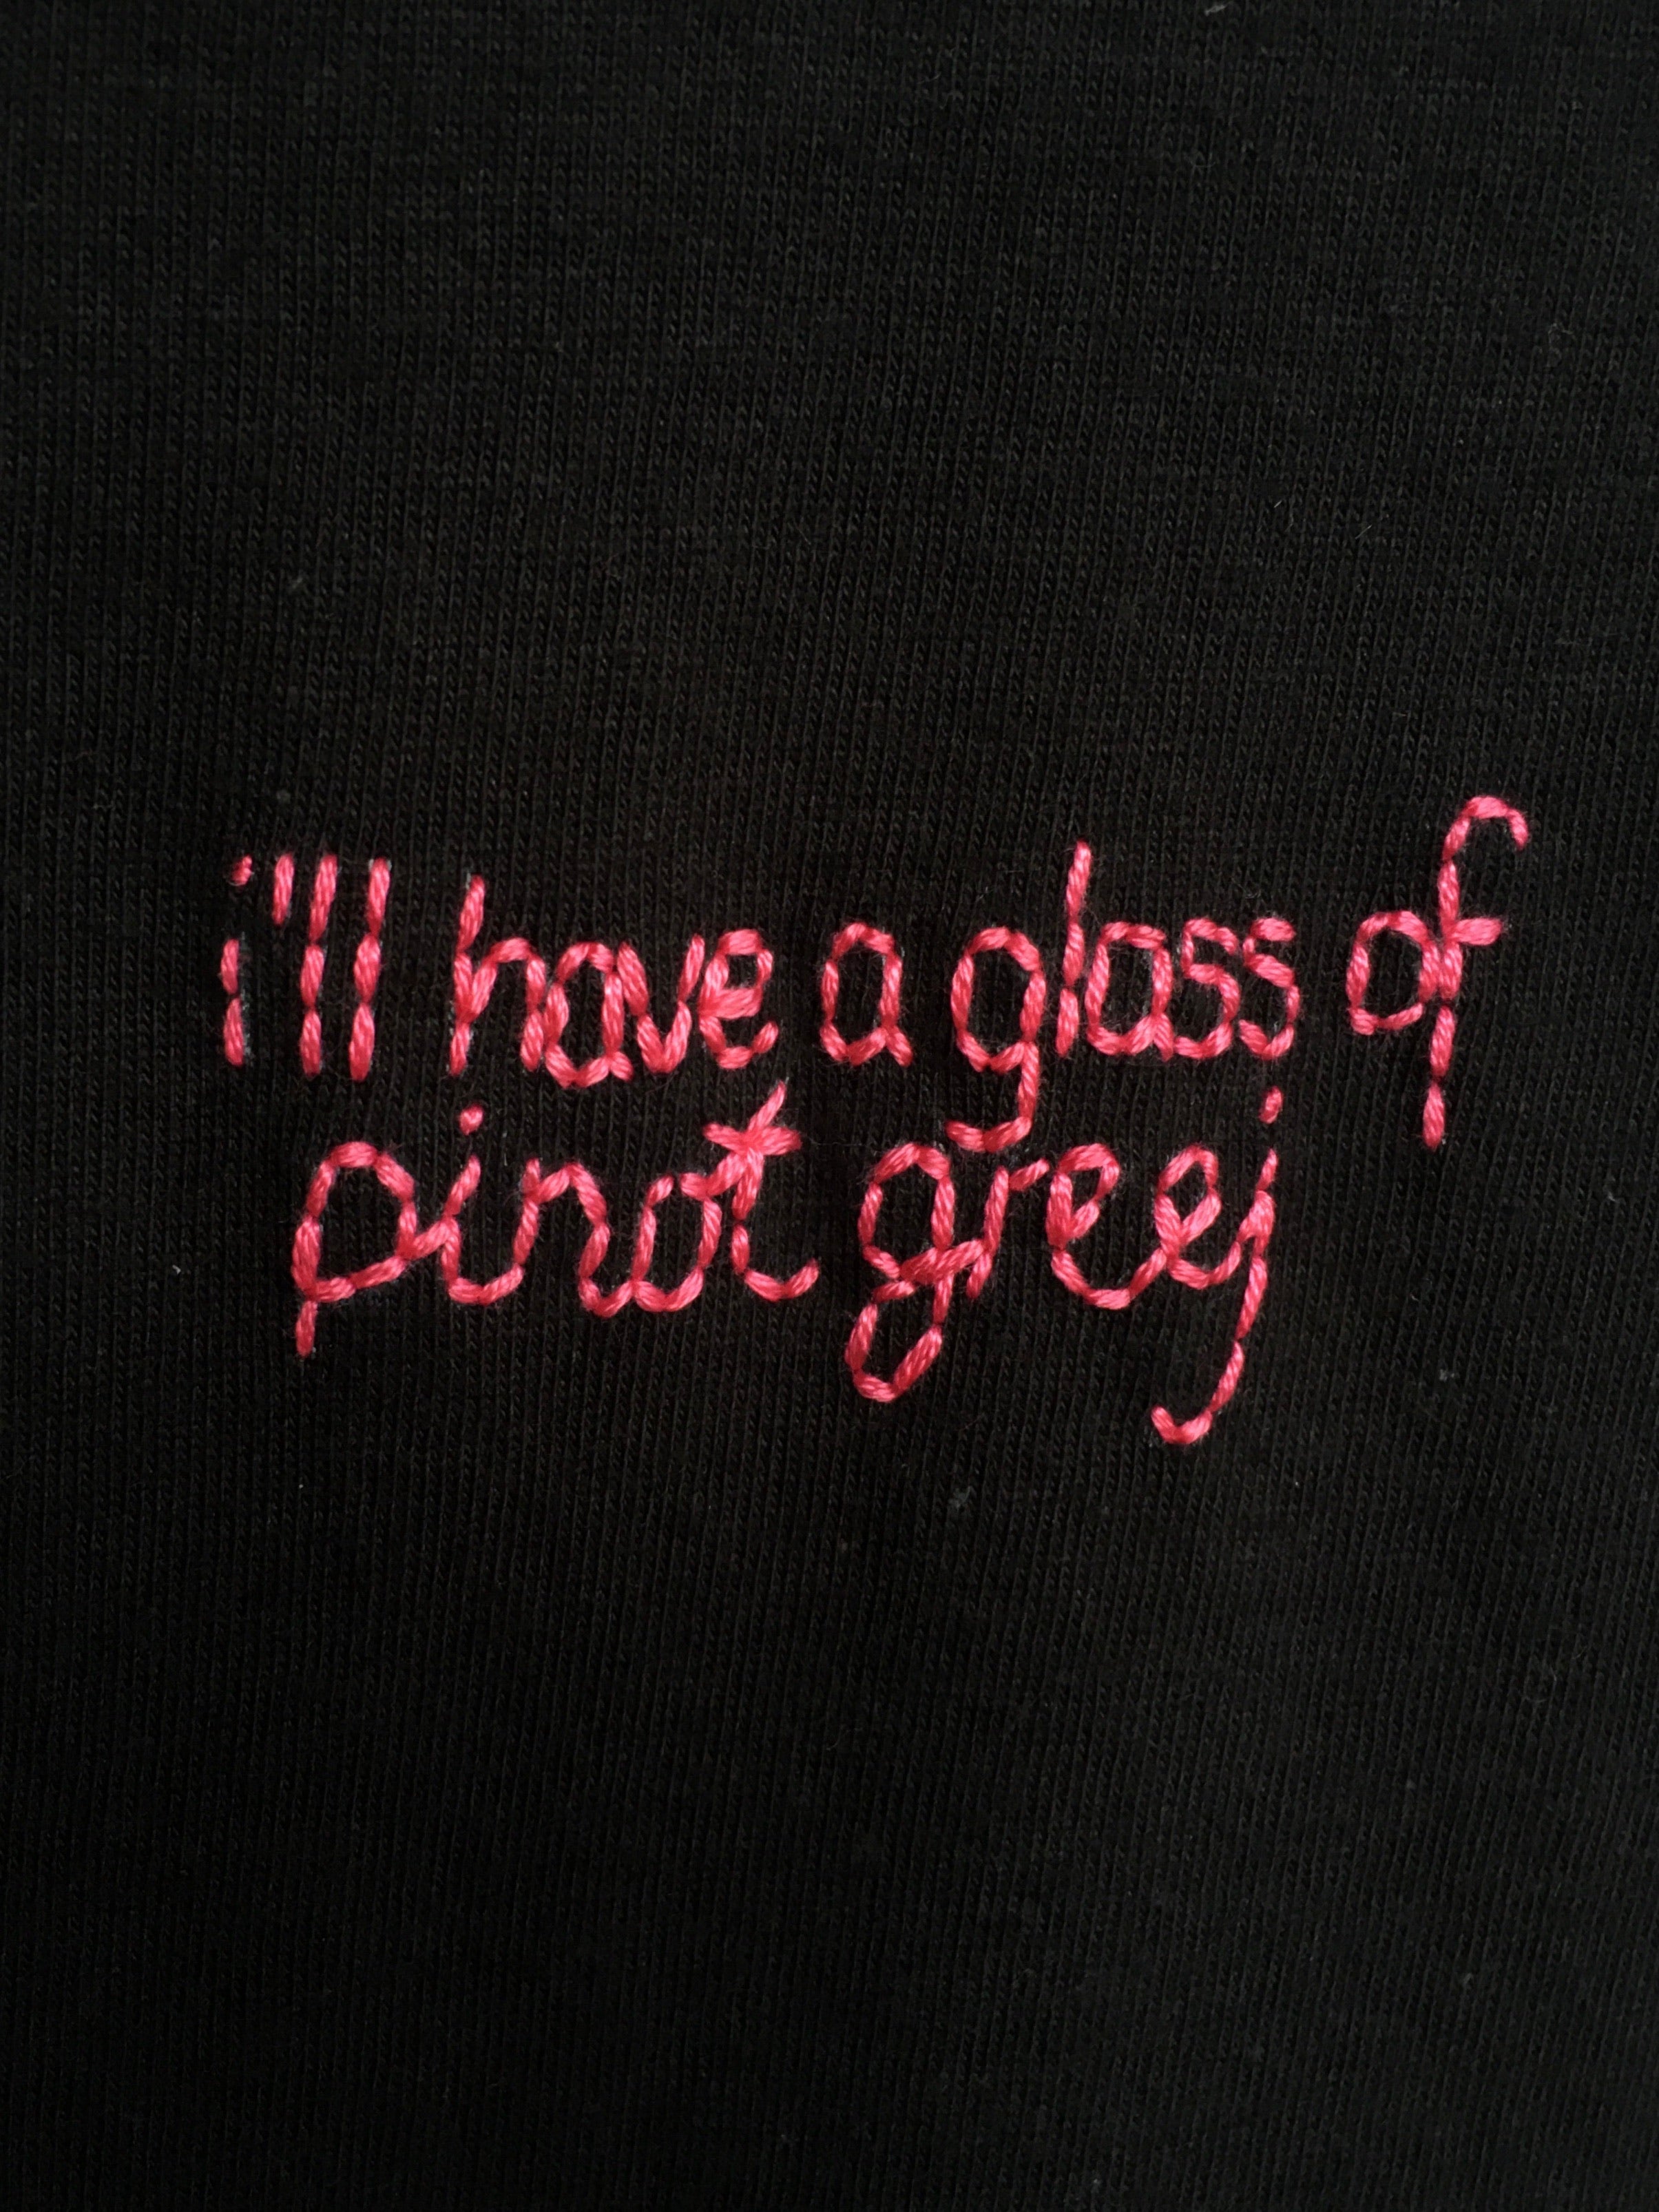 I’LL HAVE A GLASS OF PINOT GREEJ  - T SHIRT